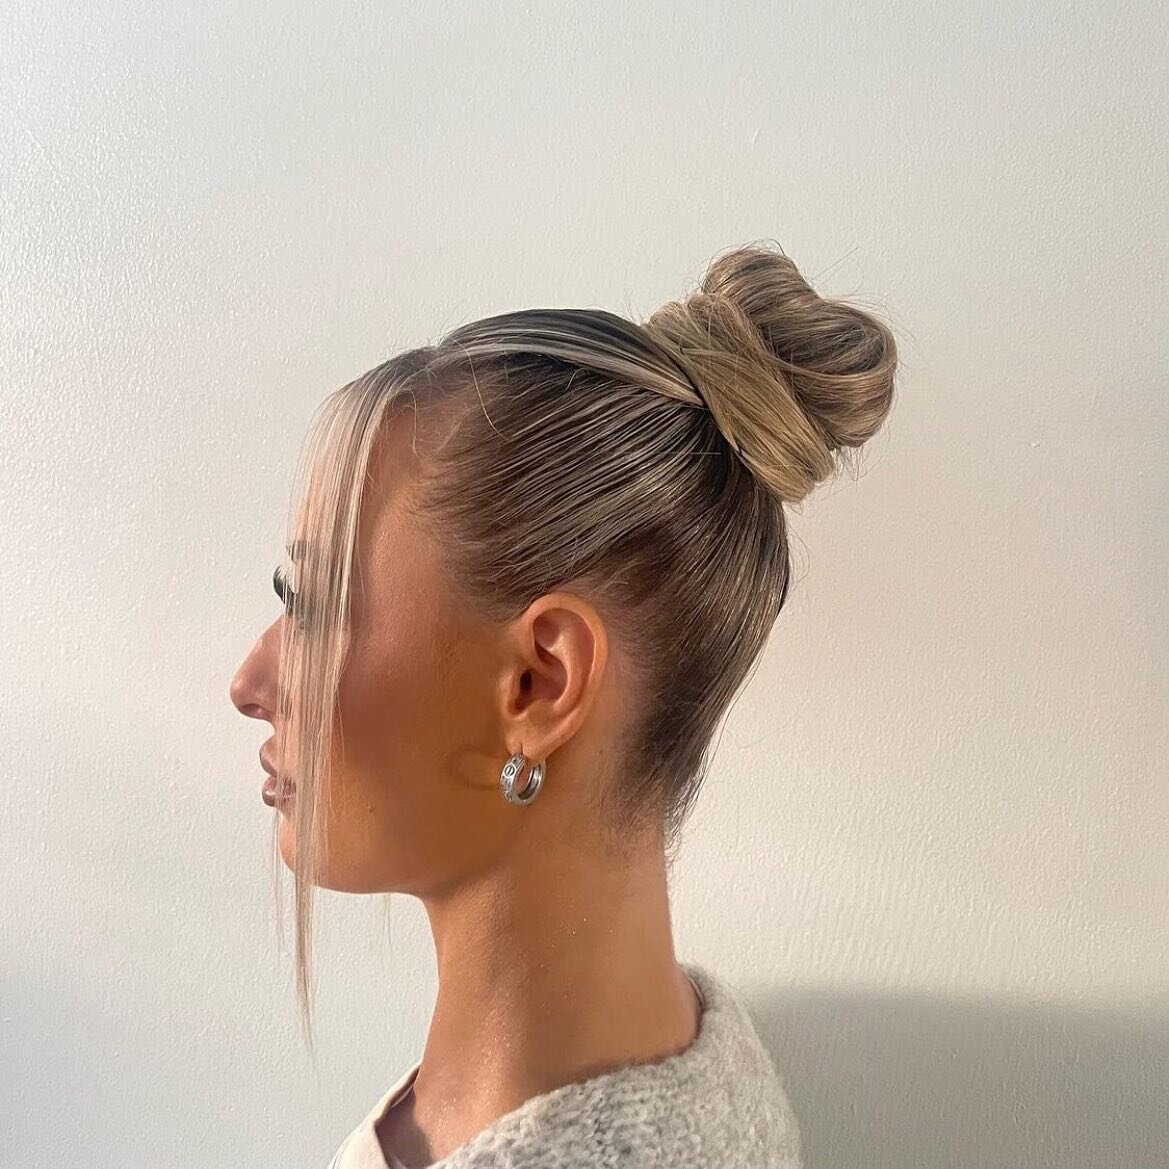 SLEEK ✨

Who else is obsessed with sleek upstyles at the minute, because we definitely are 🙌 

Created by @courtneymurphy_hairstylist 
📍Wicklow St